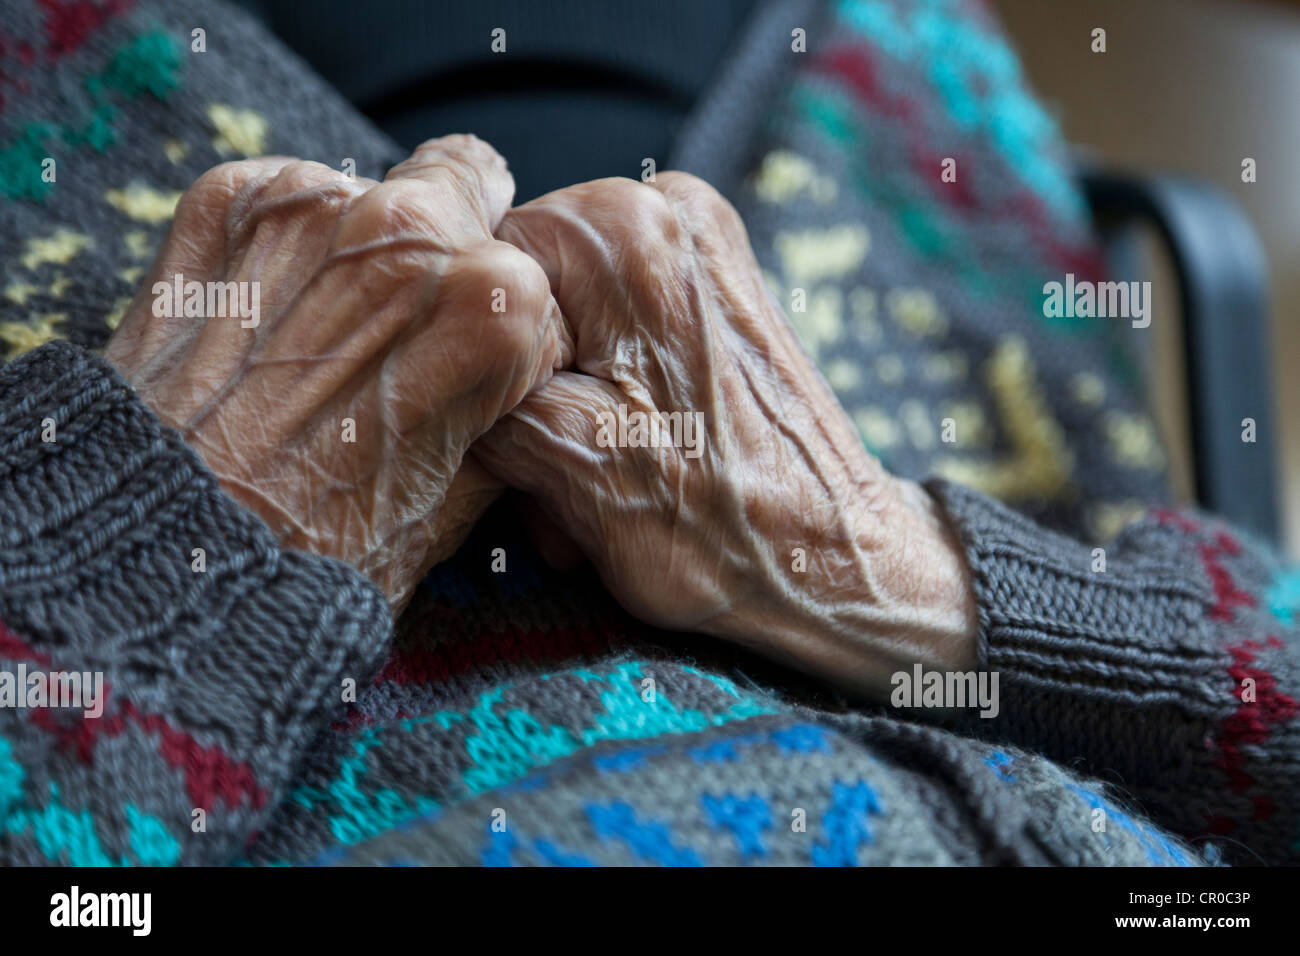 Hands of an old person showing veins, nursing home, retirement home Stock Photo